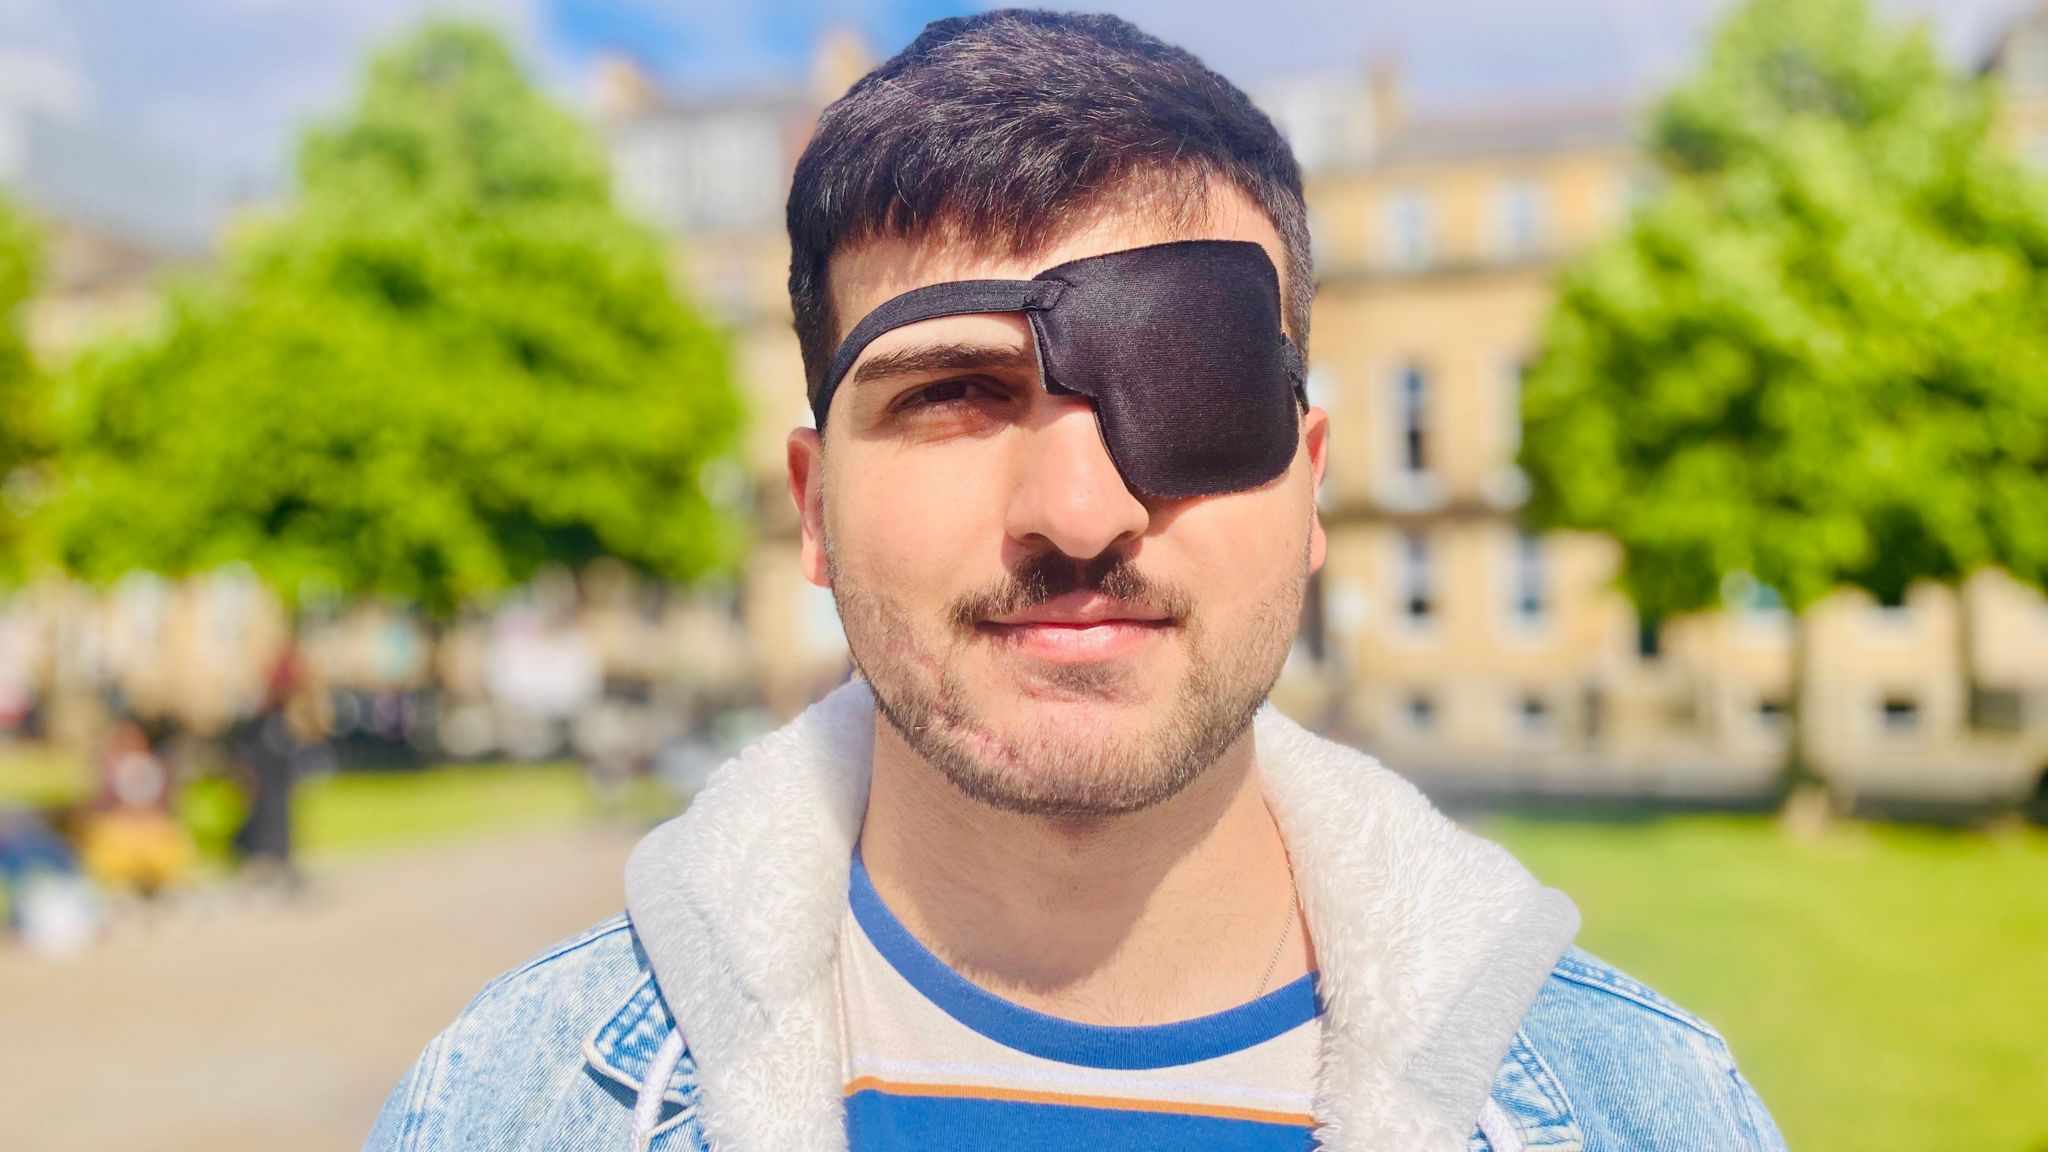 Jabar Barzanji - a man with dark hair has a patch over his left eye. He wears a denim jacket and stands in front of a small park